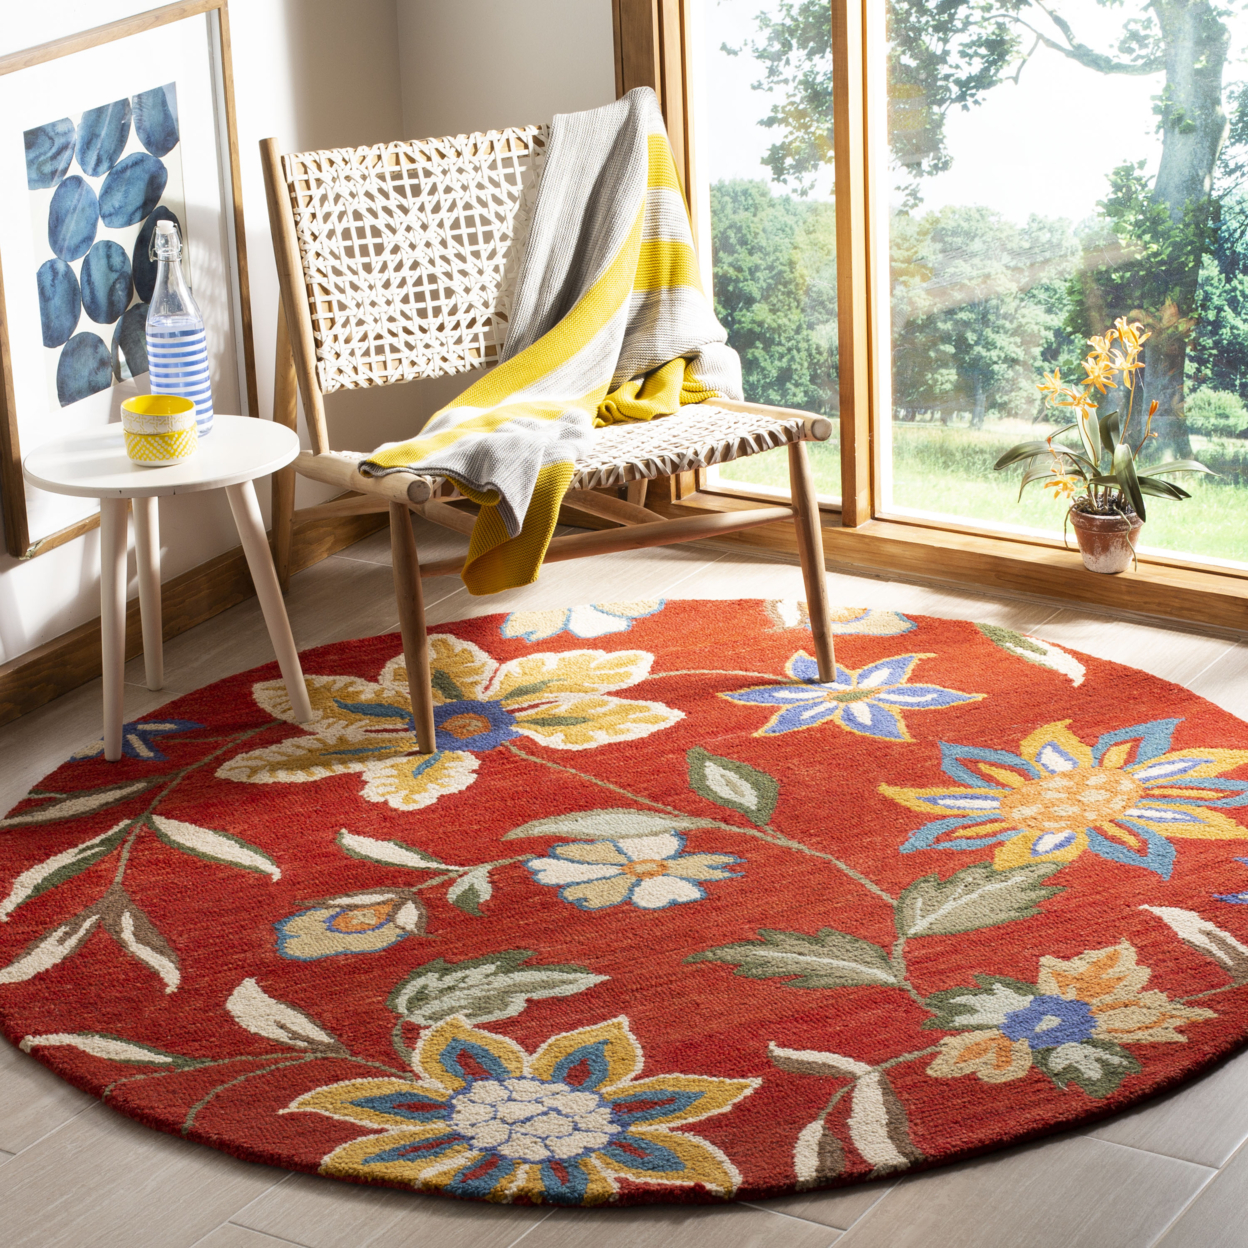 SAFAVIEH Blossom BLM673A Hand-hooked Rust / Multi Rug - 6' Square